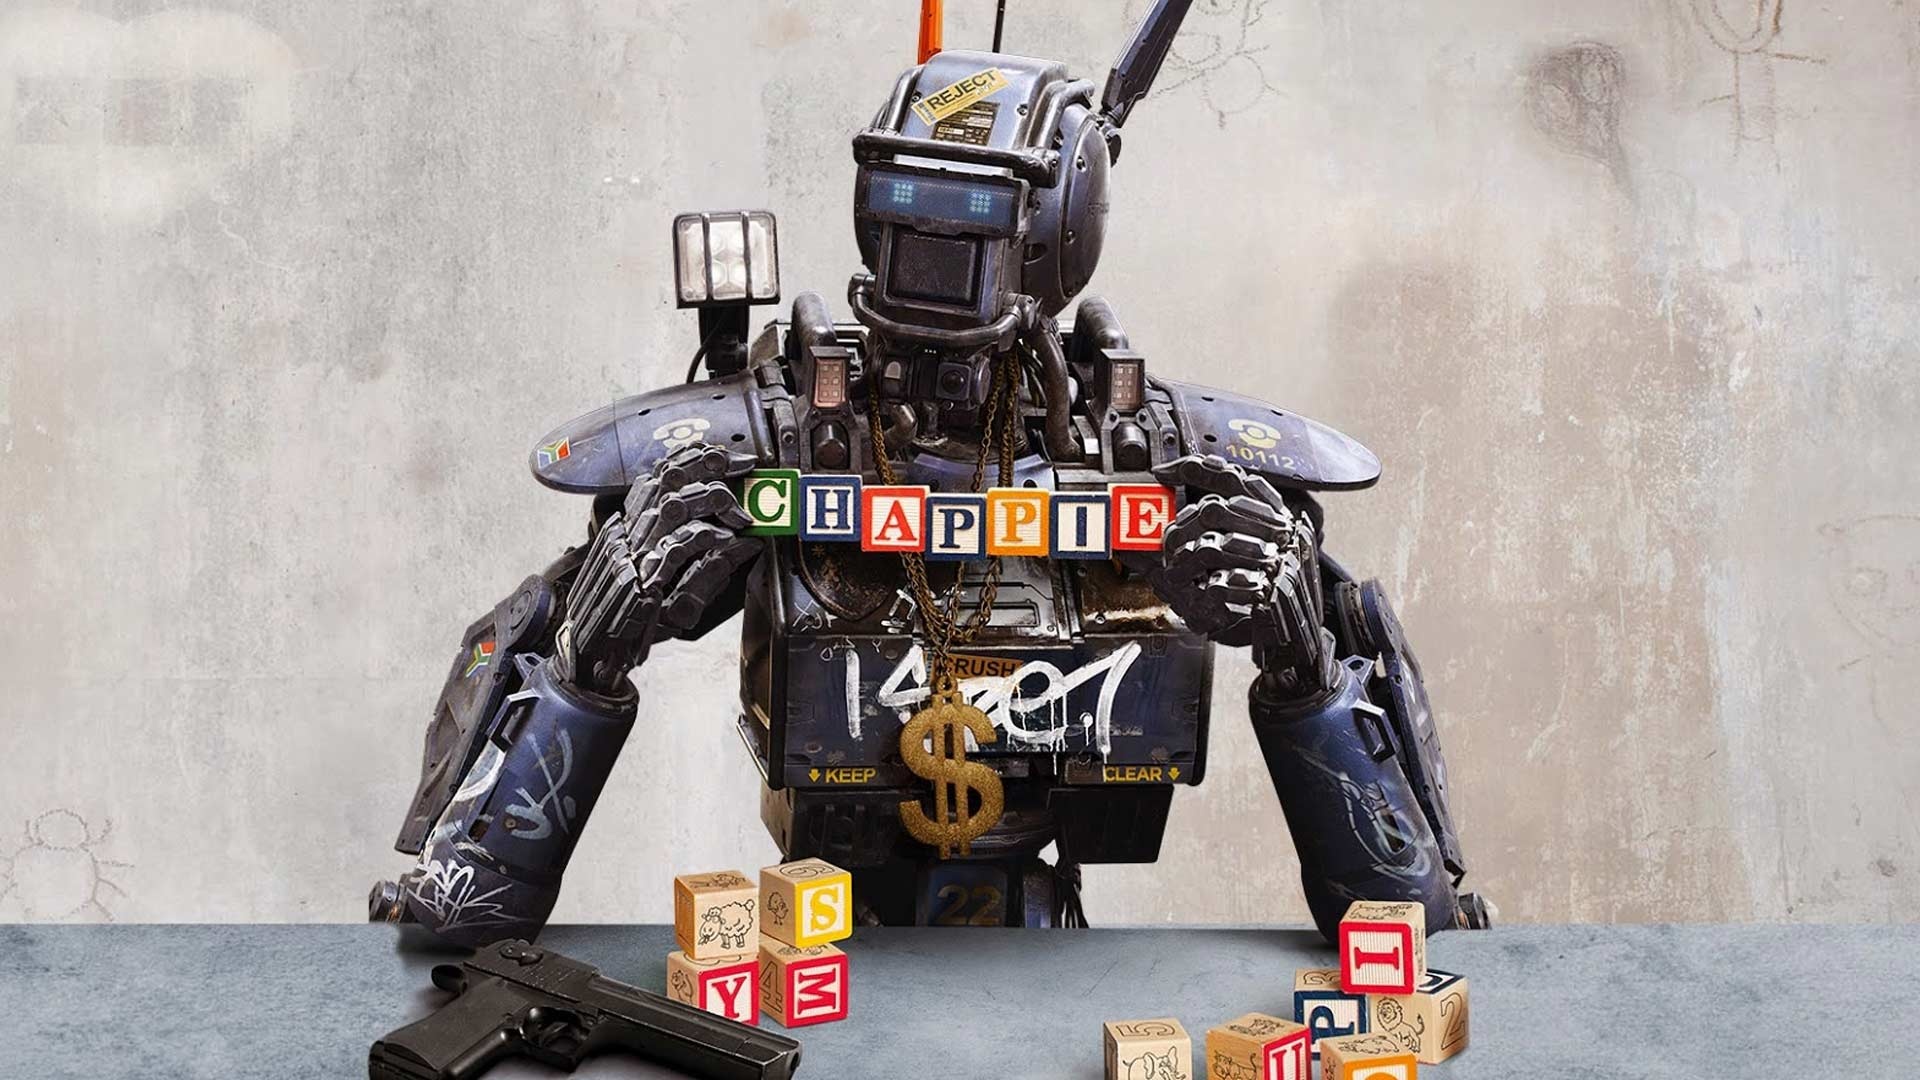 Chappie: The third feature, directed by Neill Blomkamp. 1920x1080 Full HD Wallpaper.